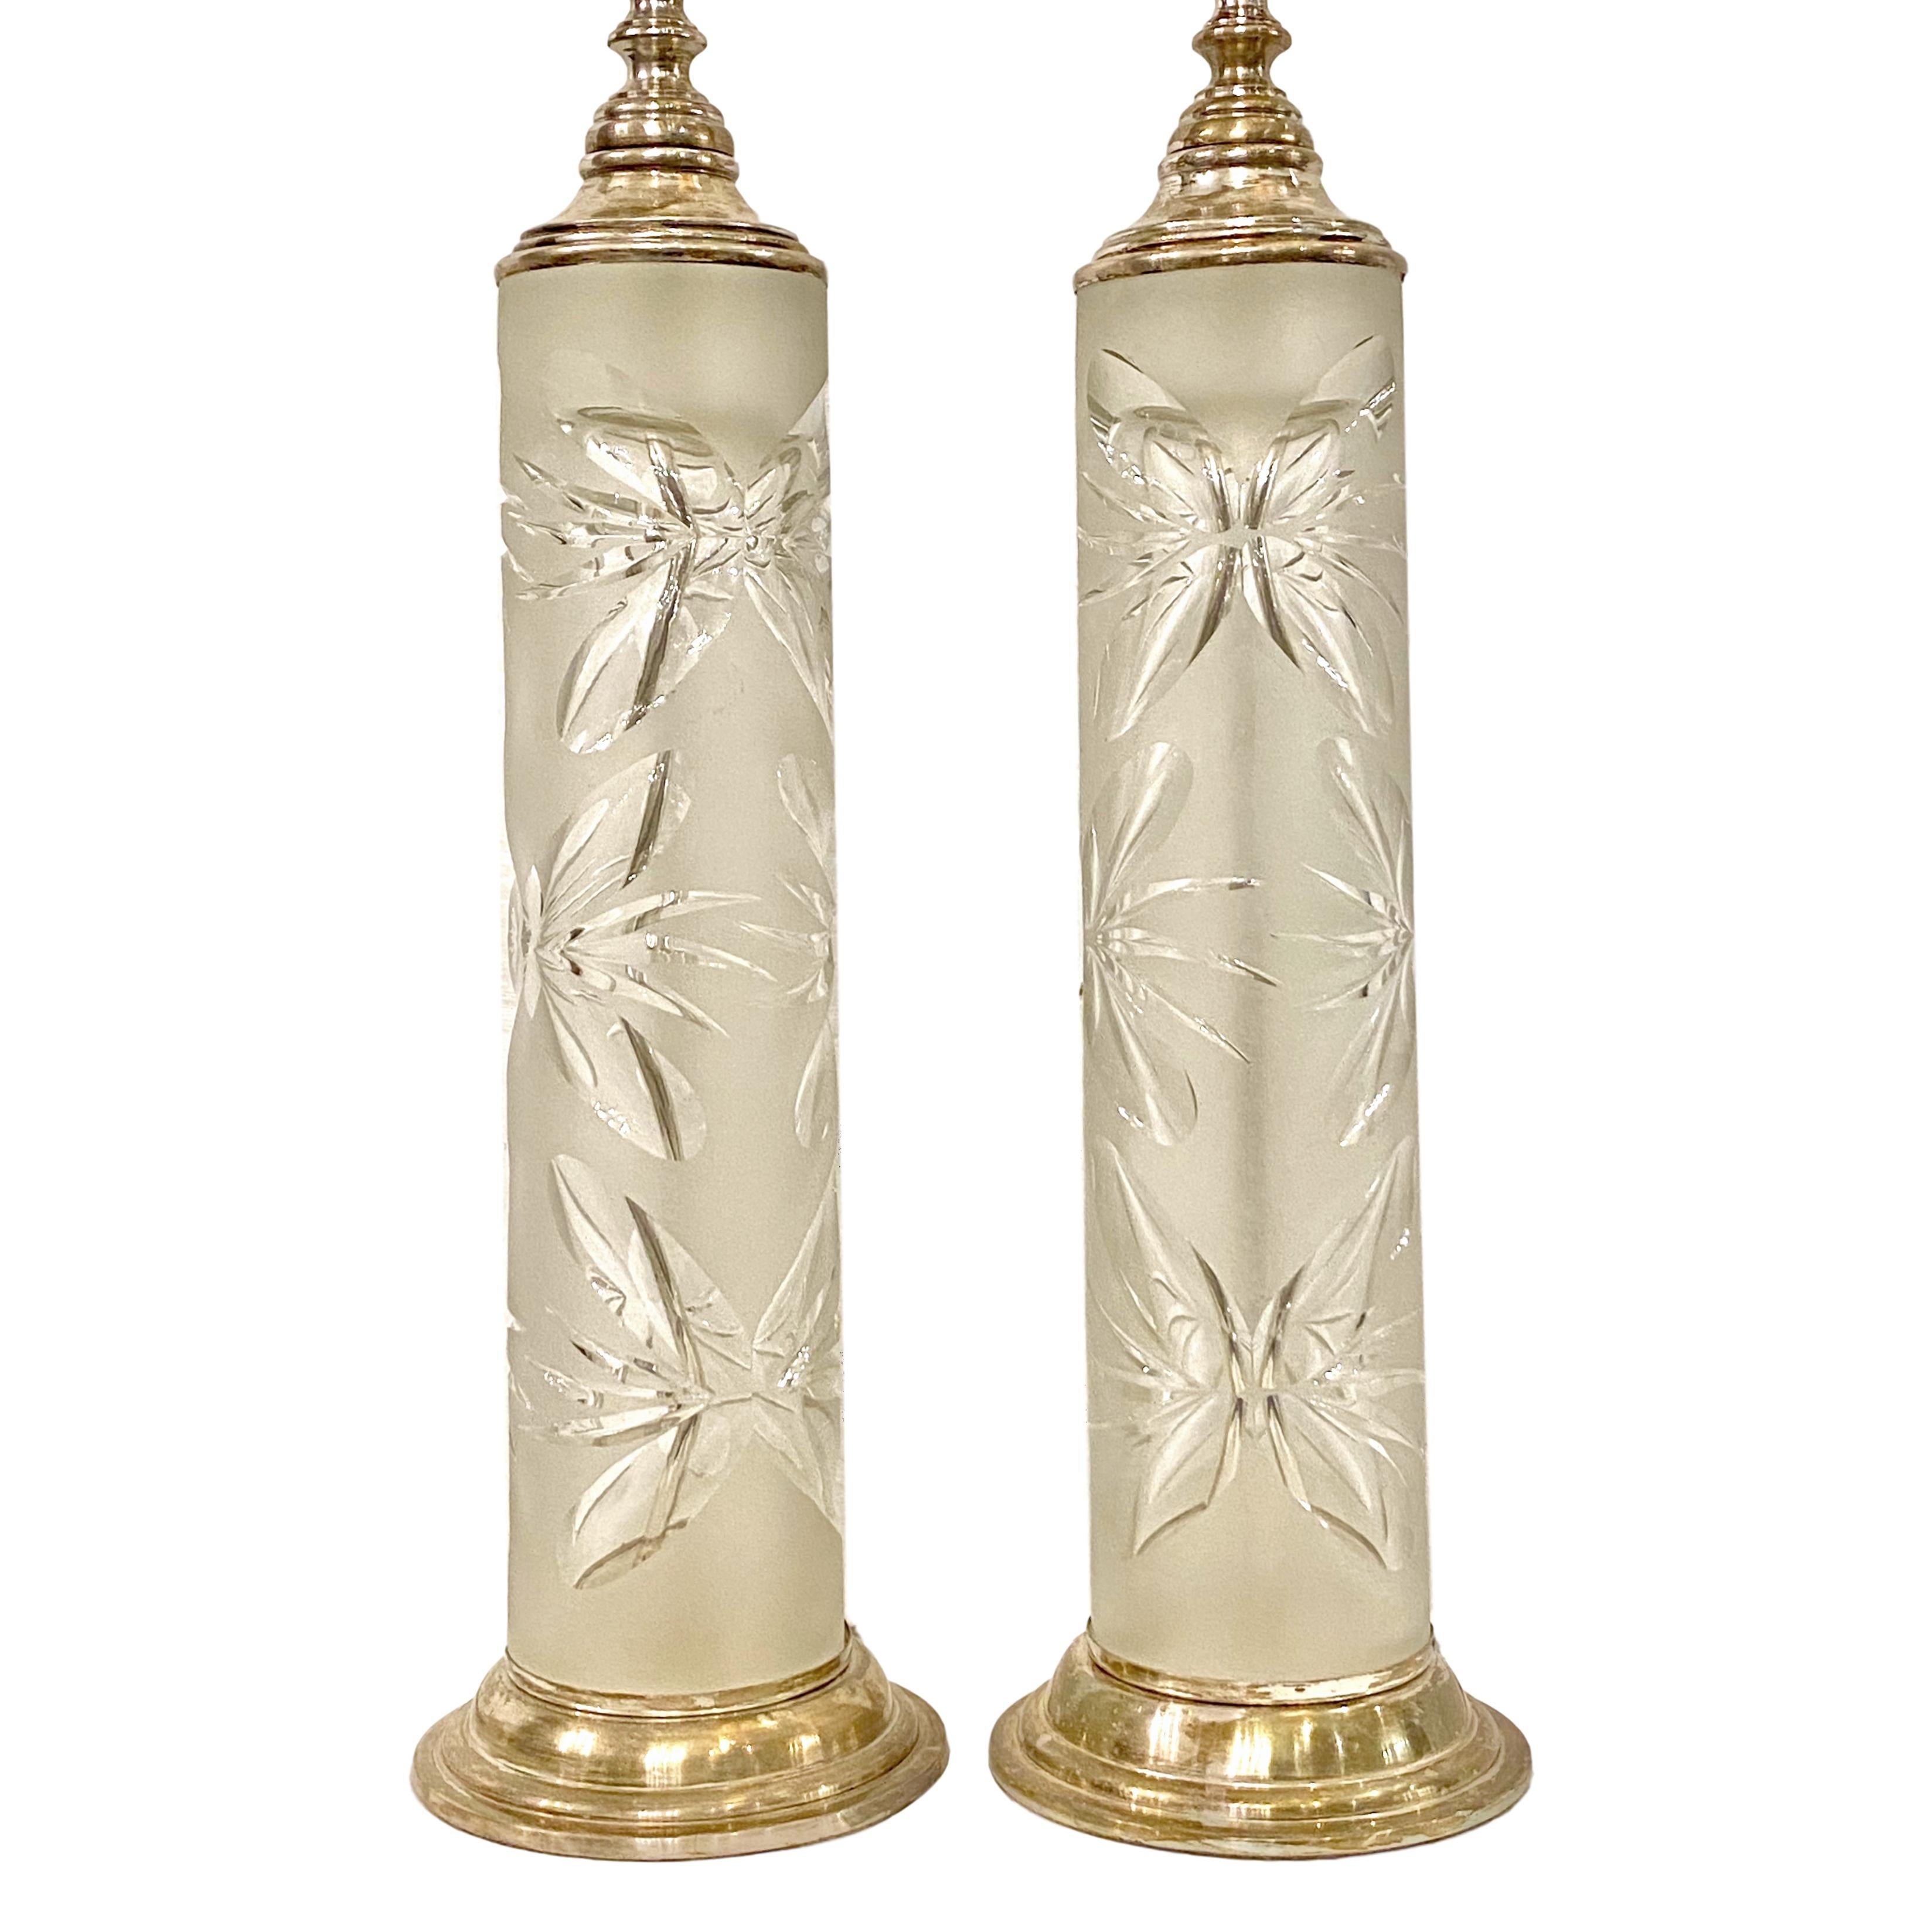 A pair of circa 1940s French cut glass table lamps with silvered fittings.

Measurements:
Height of body 18